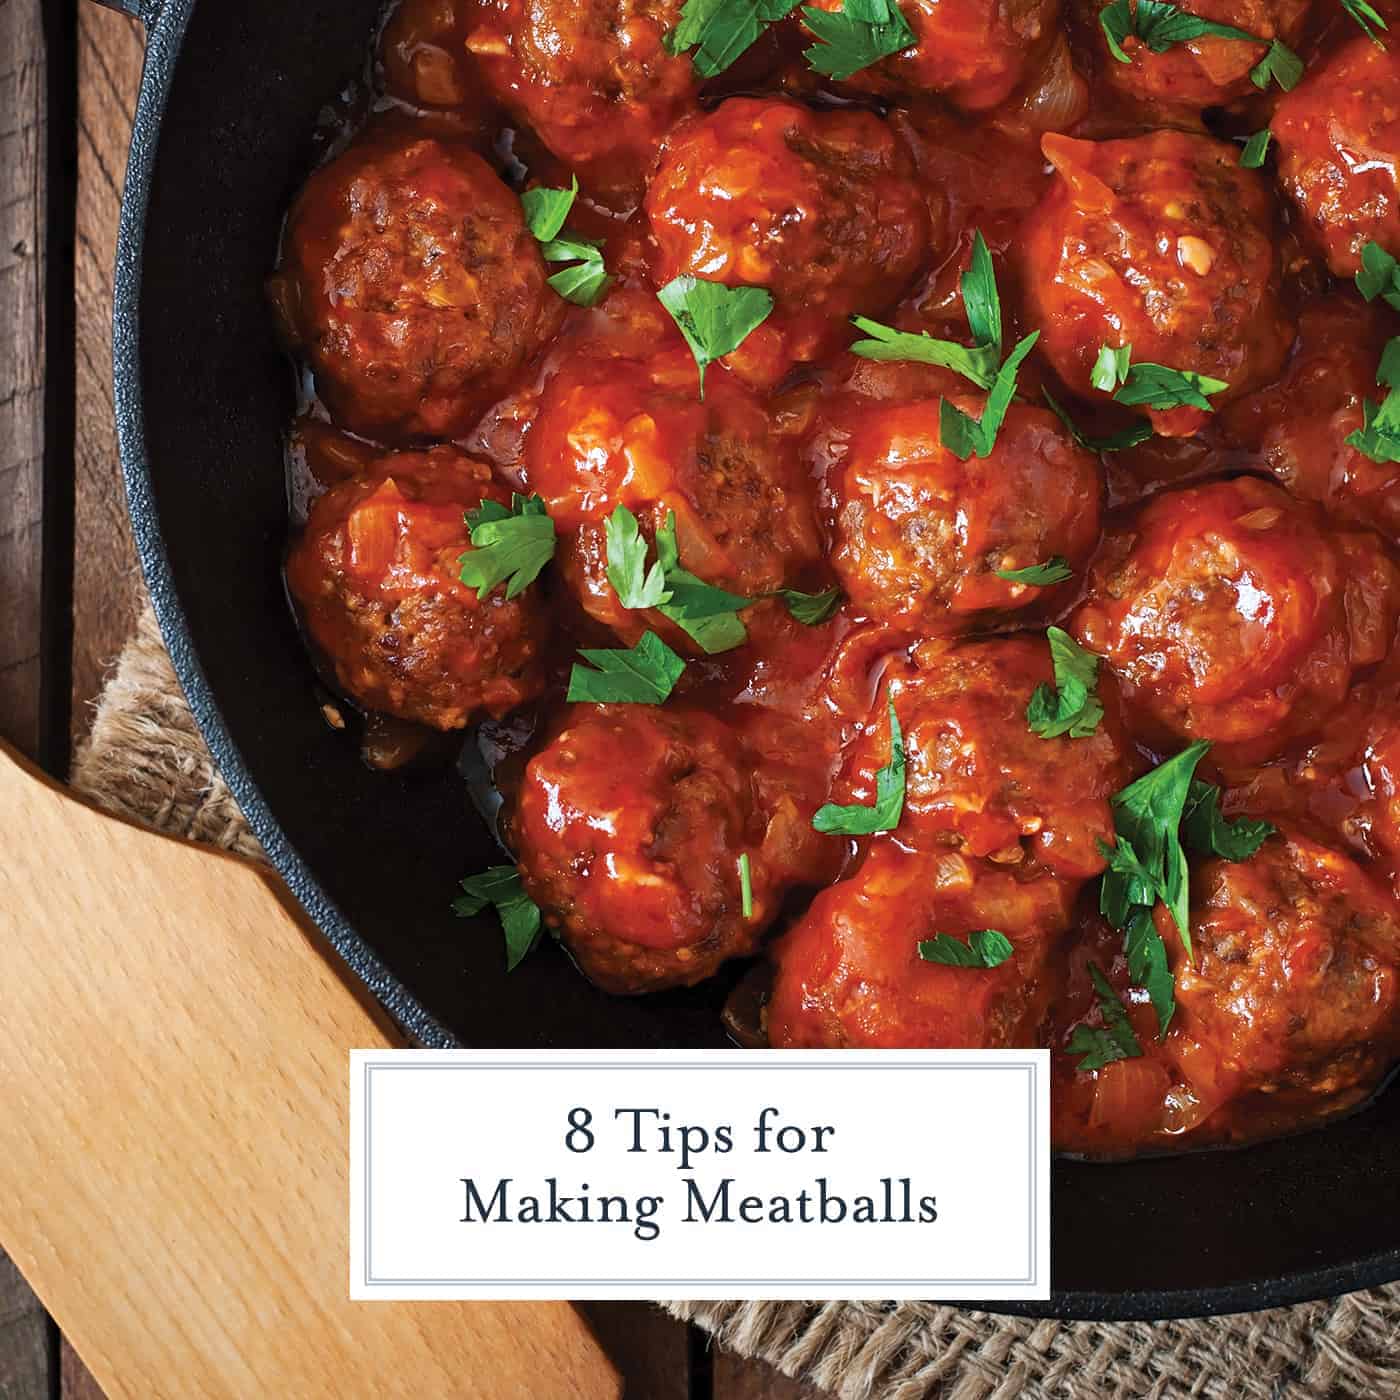 Read my 8 tips for making meatballs that can be applied to any meatball recipes, plus my secret Italian meatball recipe! #howtomakemeatballs www.savoryexperiments.com 